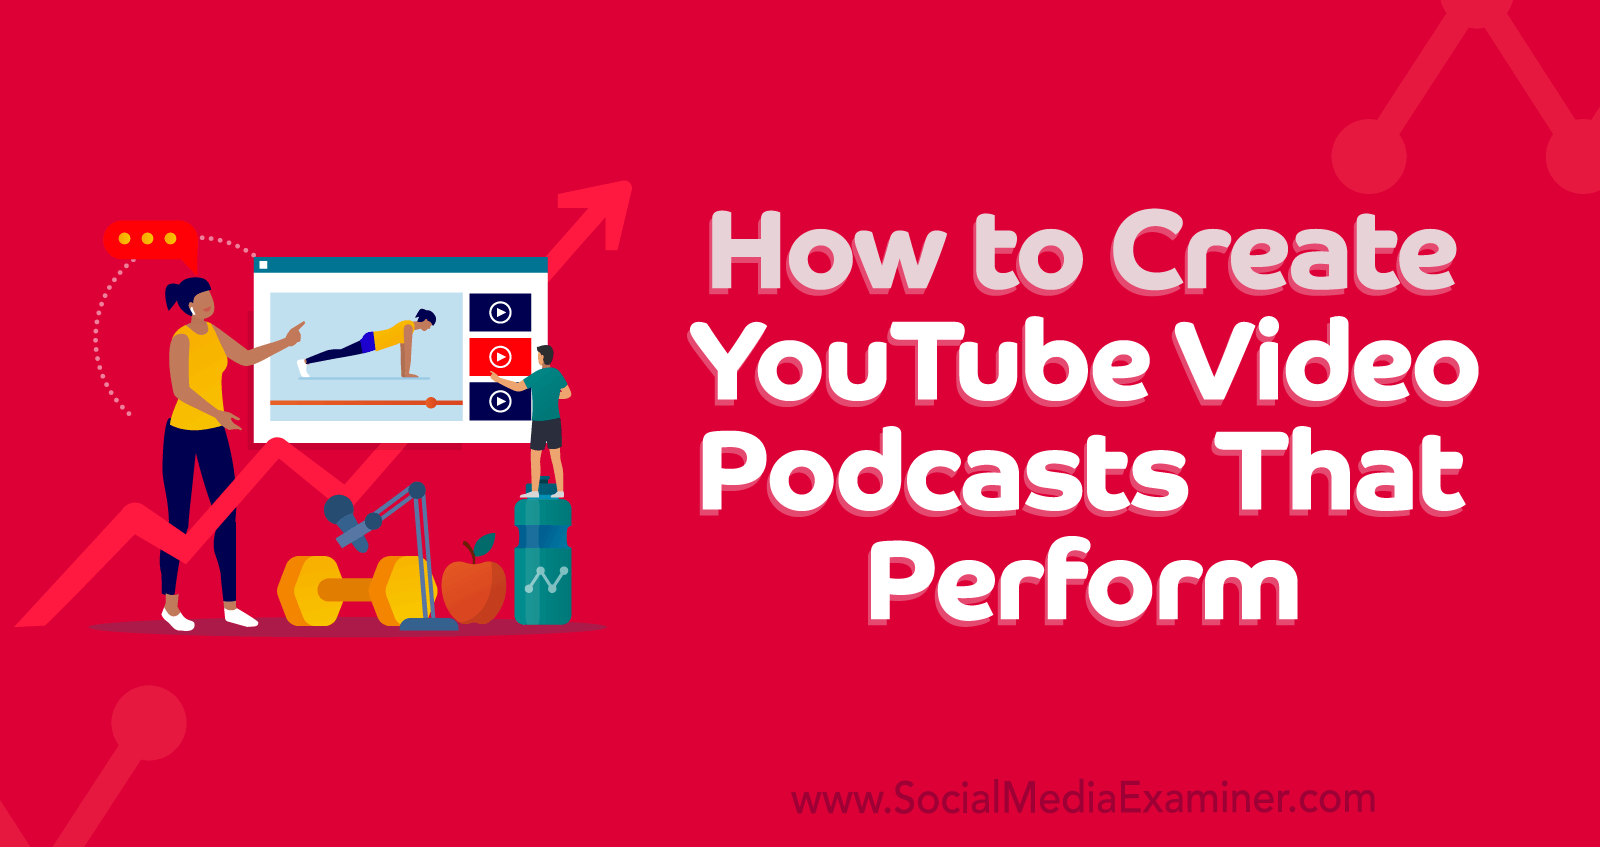 How to Create YouTube Video Podcasts That Perform by Social Media Examiner